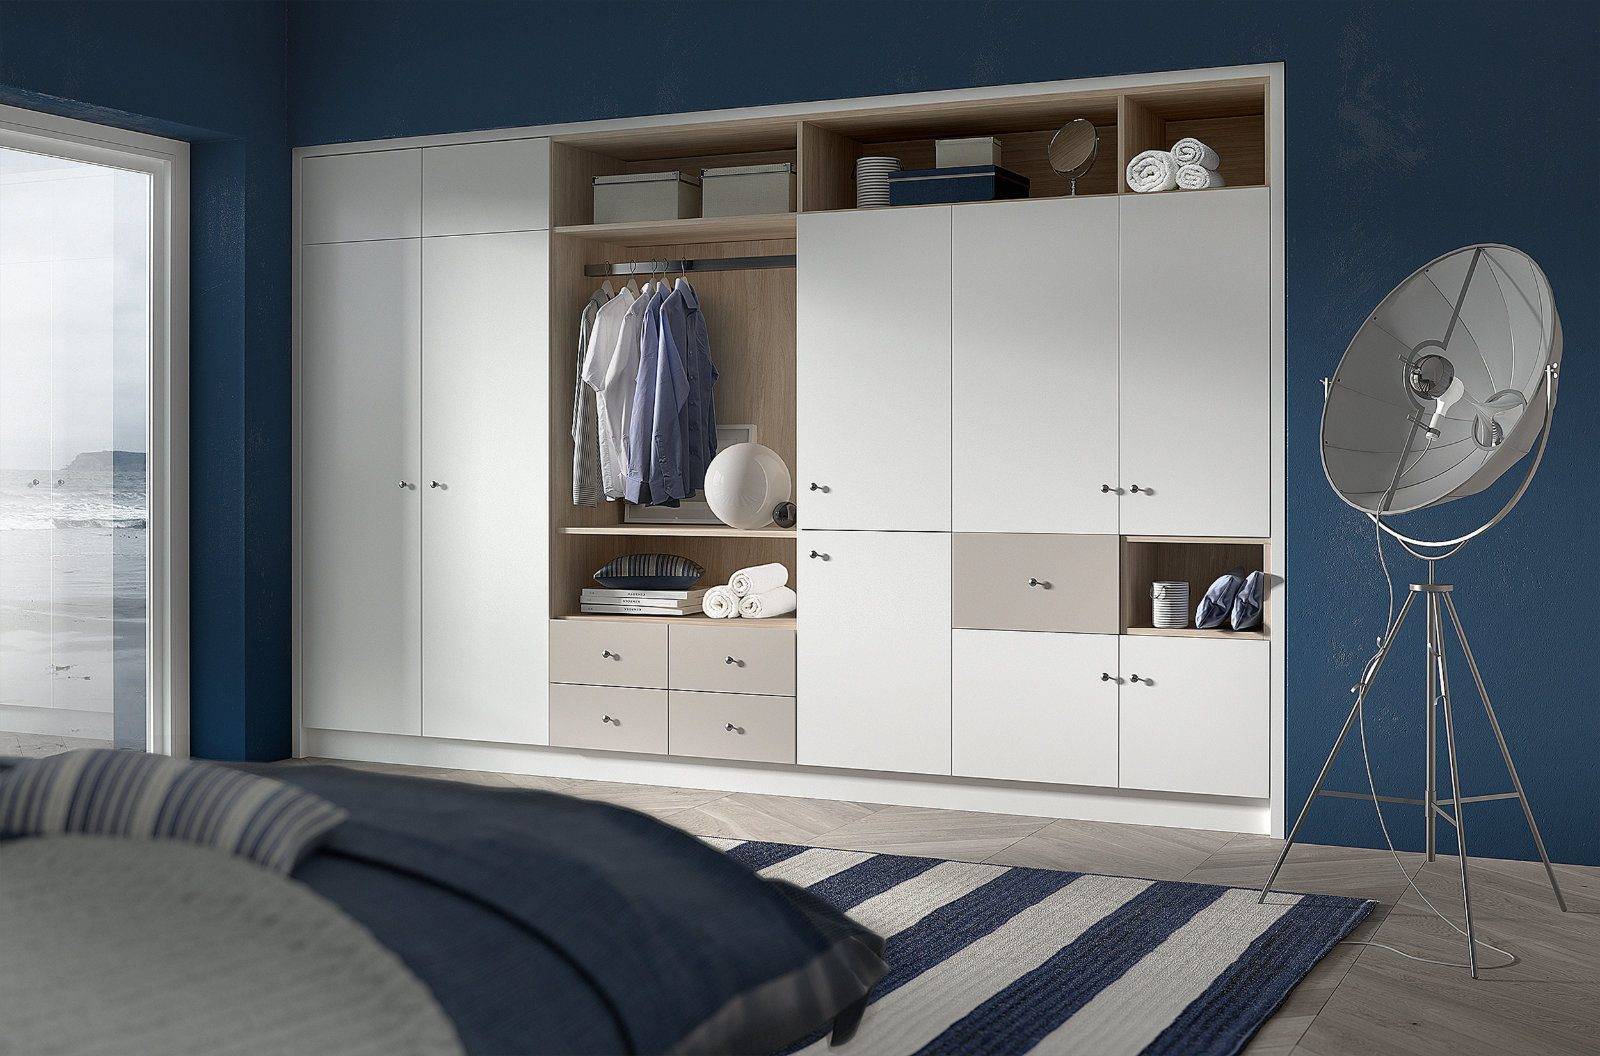 IntegralWhiteChampagneBedroom | Colourhill Kitchens & Bedrooms Chesterfield